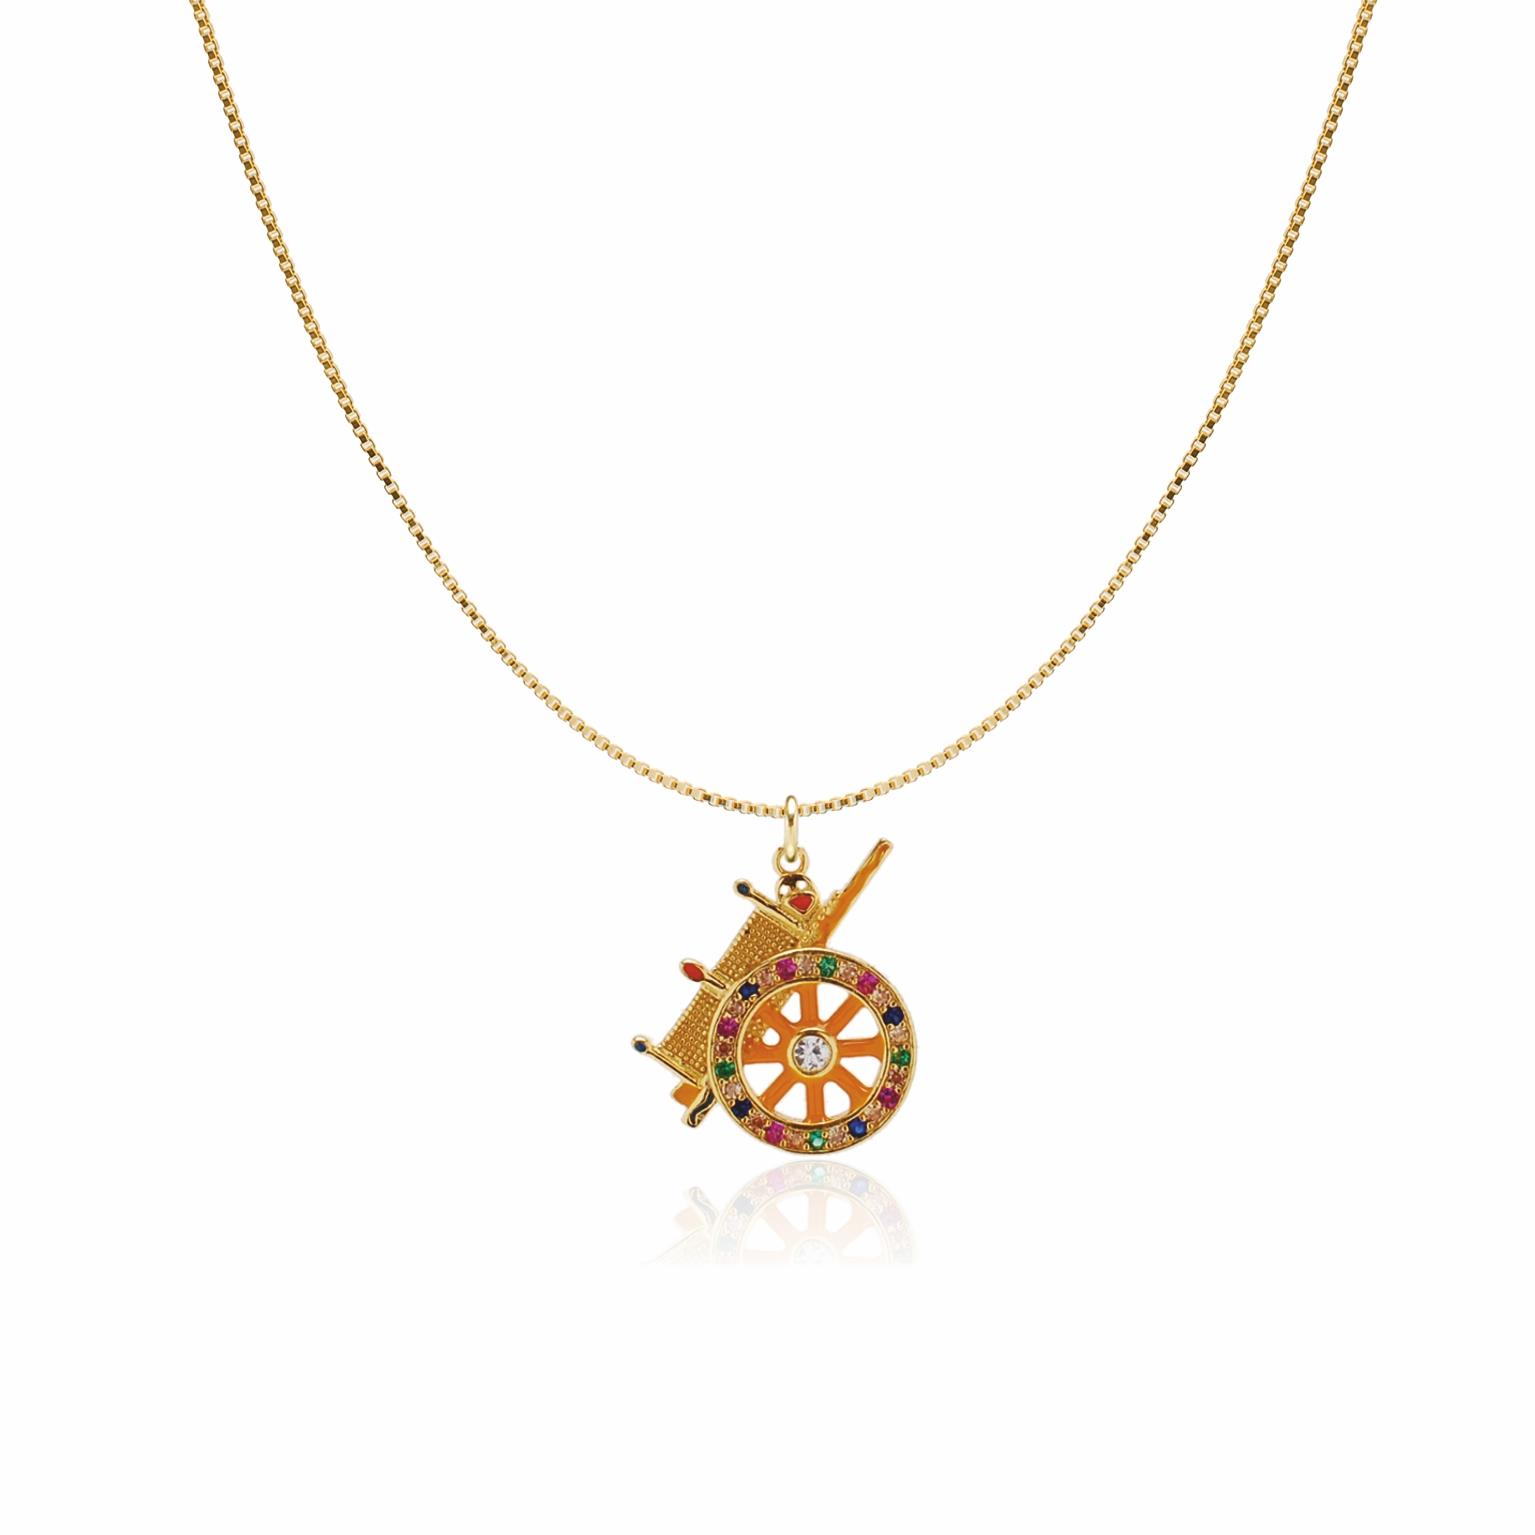 Necklace in golden silver with Sicilian Cart symbol pendant with enamel and colored zircons - MY SICILY